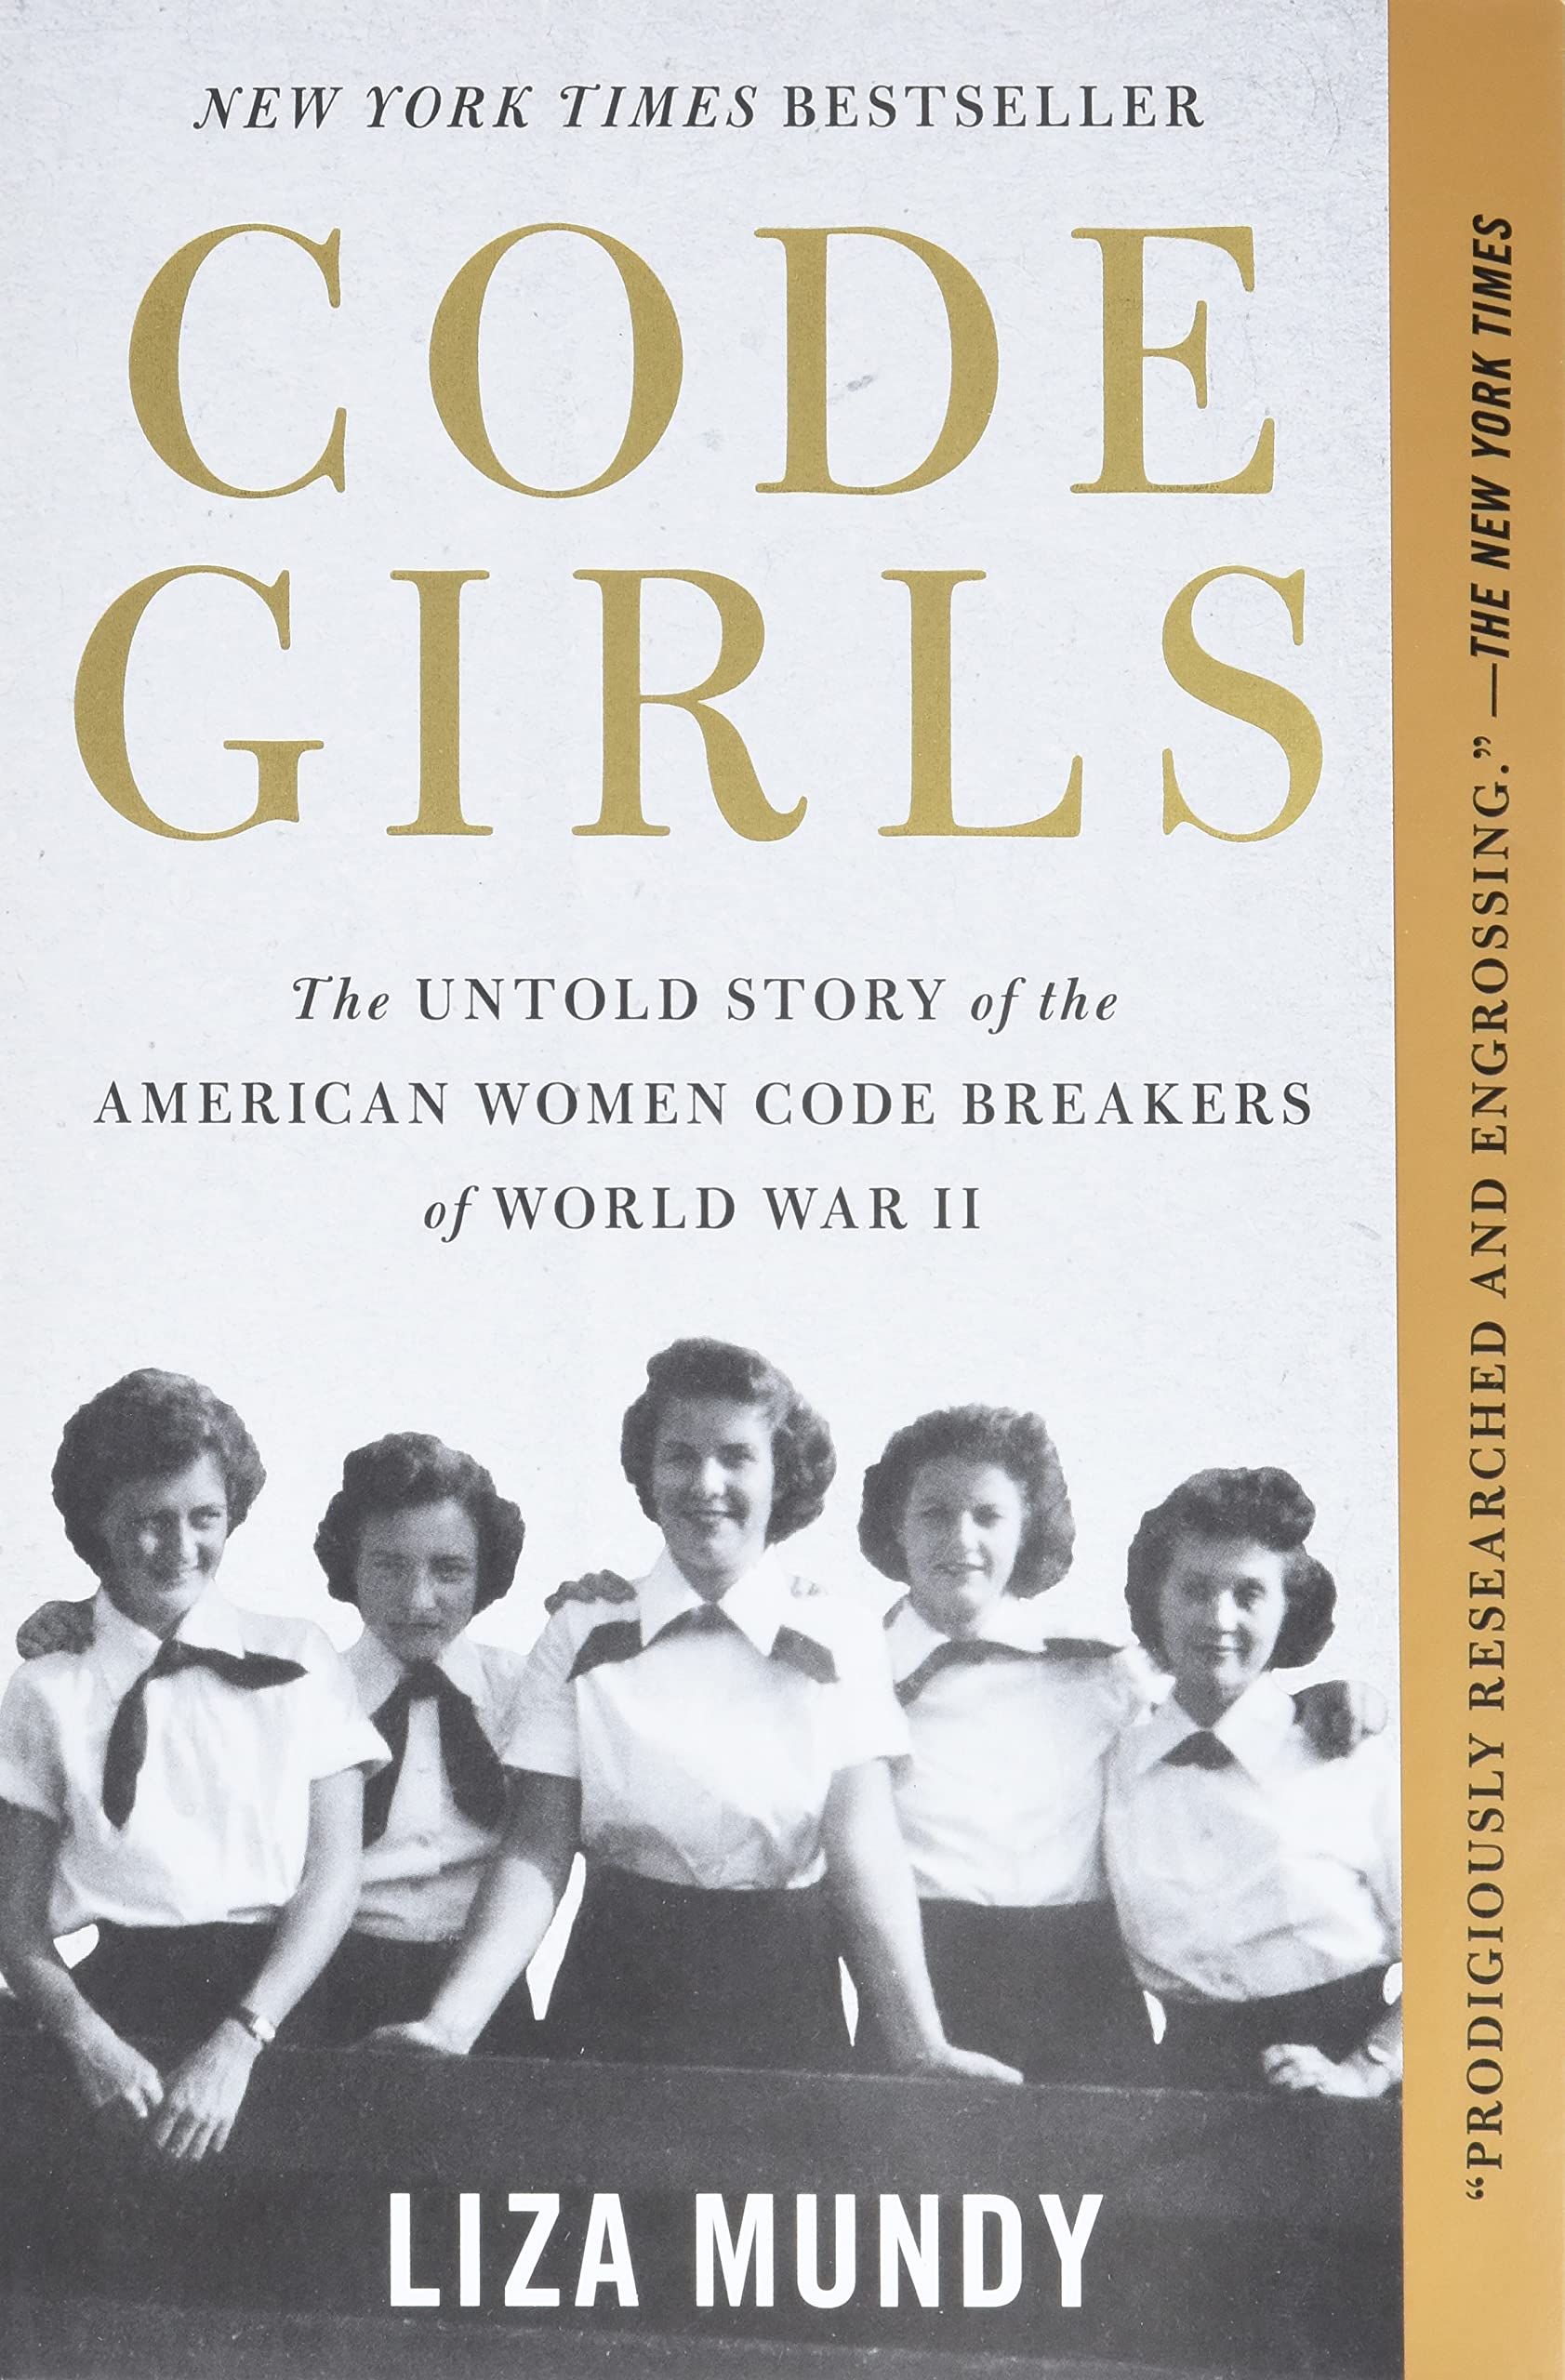 Image for "Code Girls"